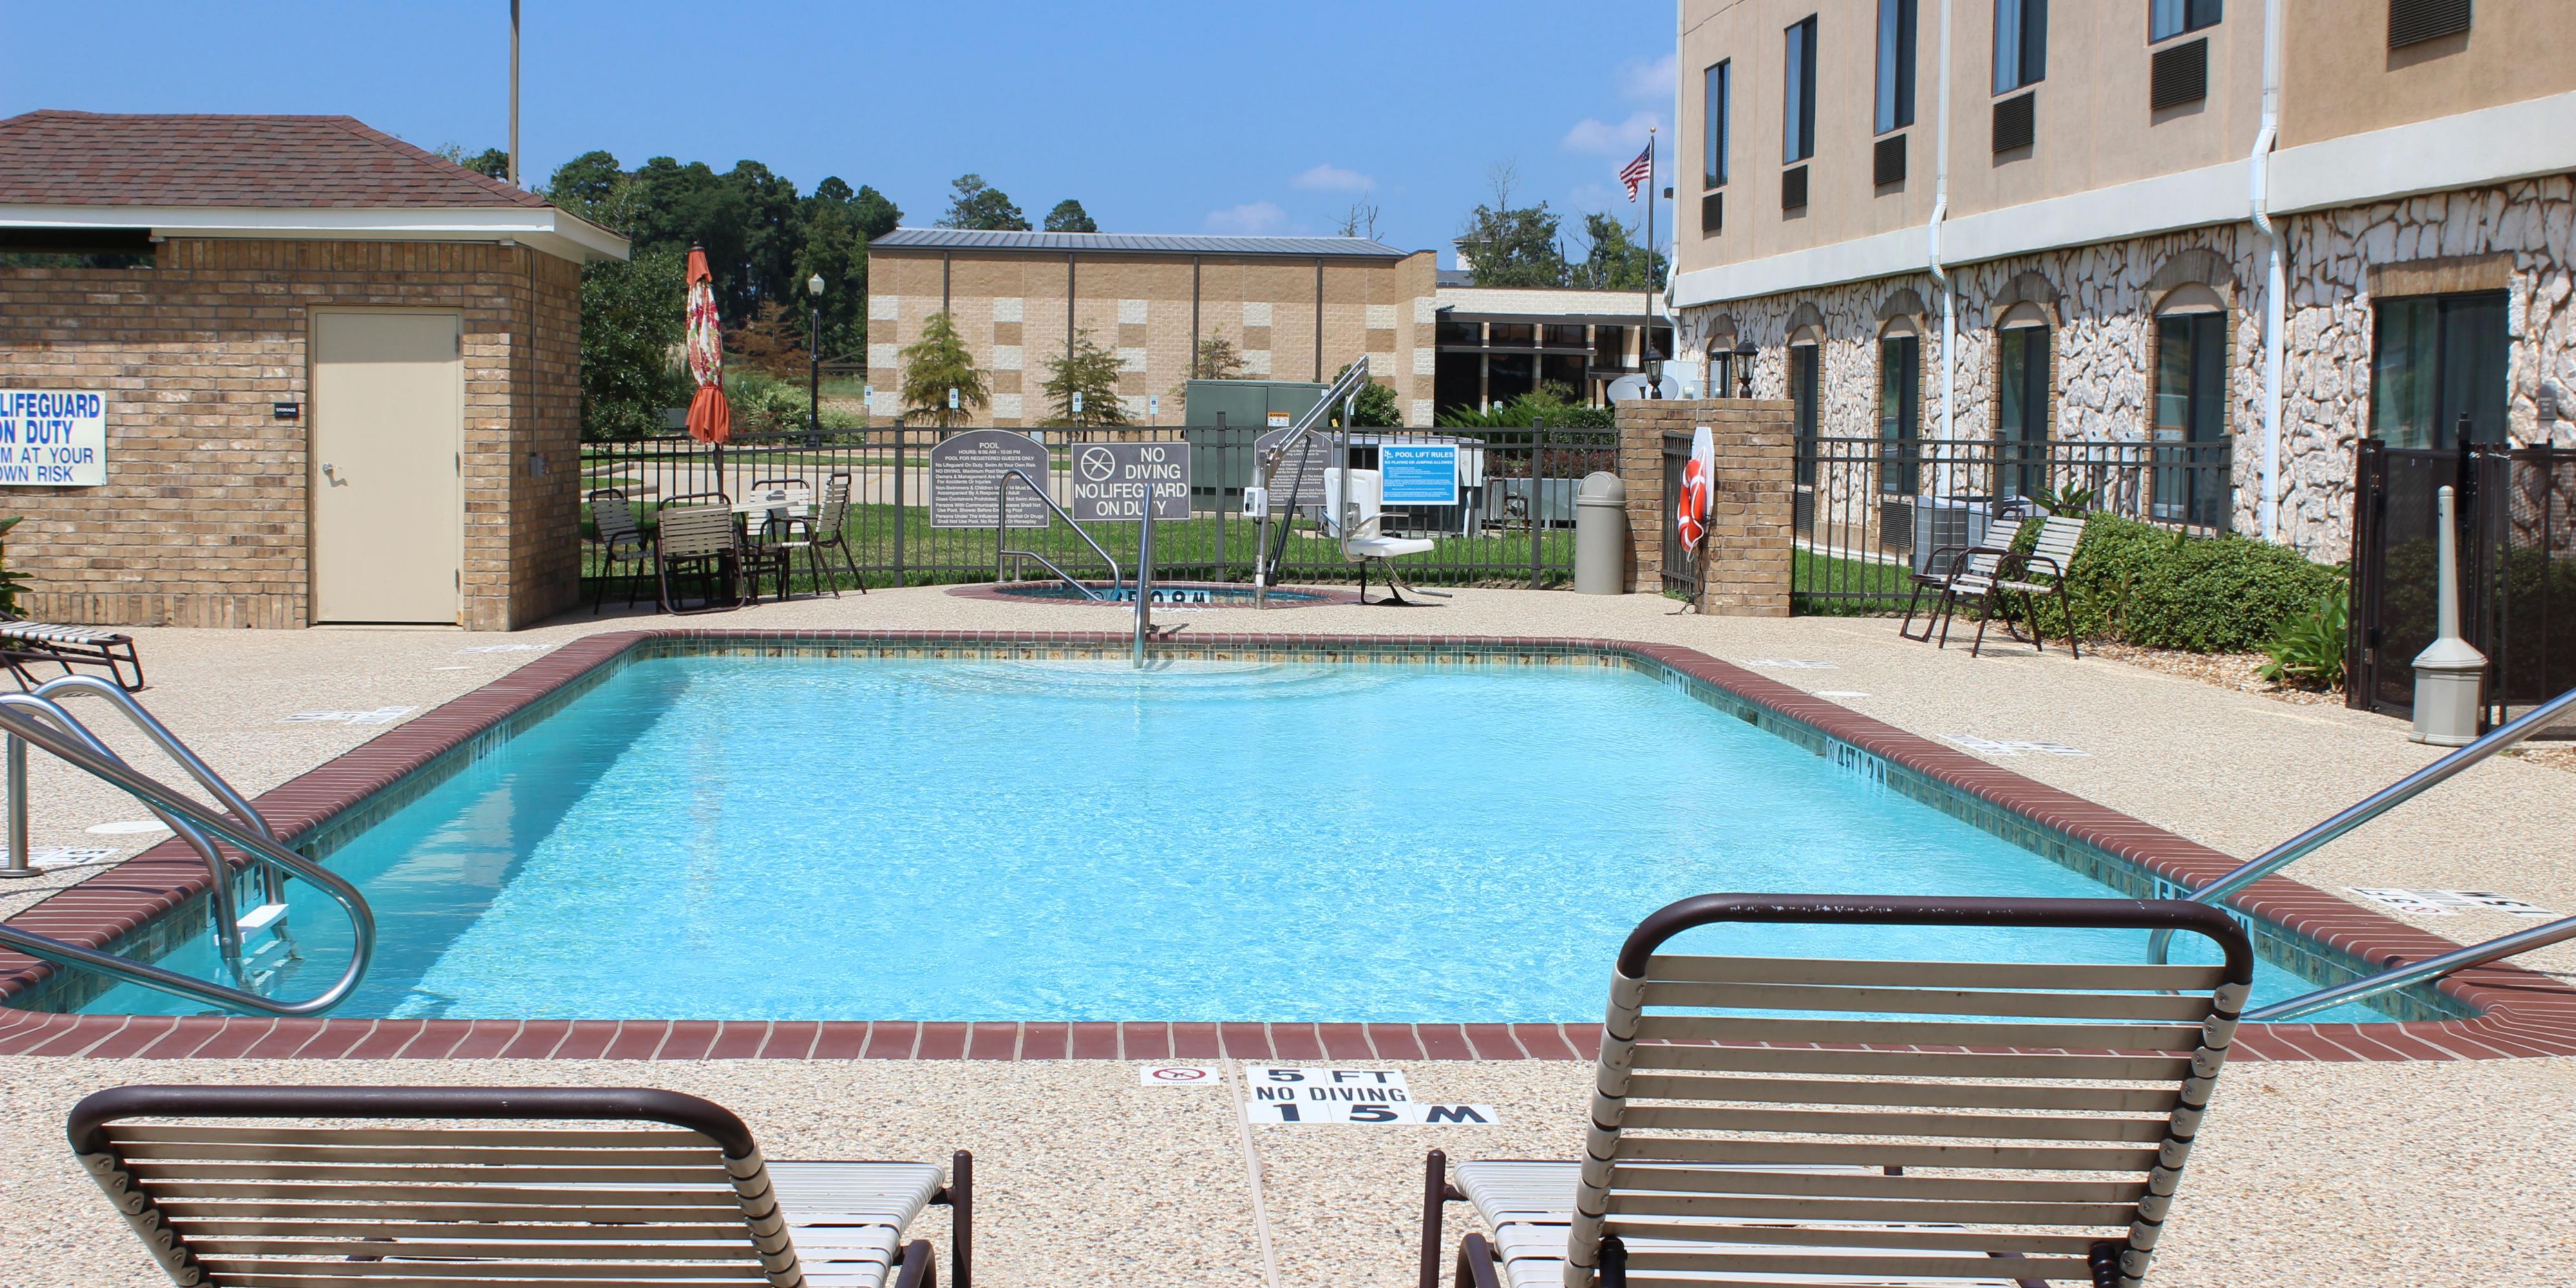 Relax and unwind in the complimentary outdoor pool and whirlpool spa